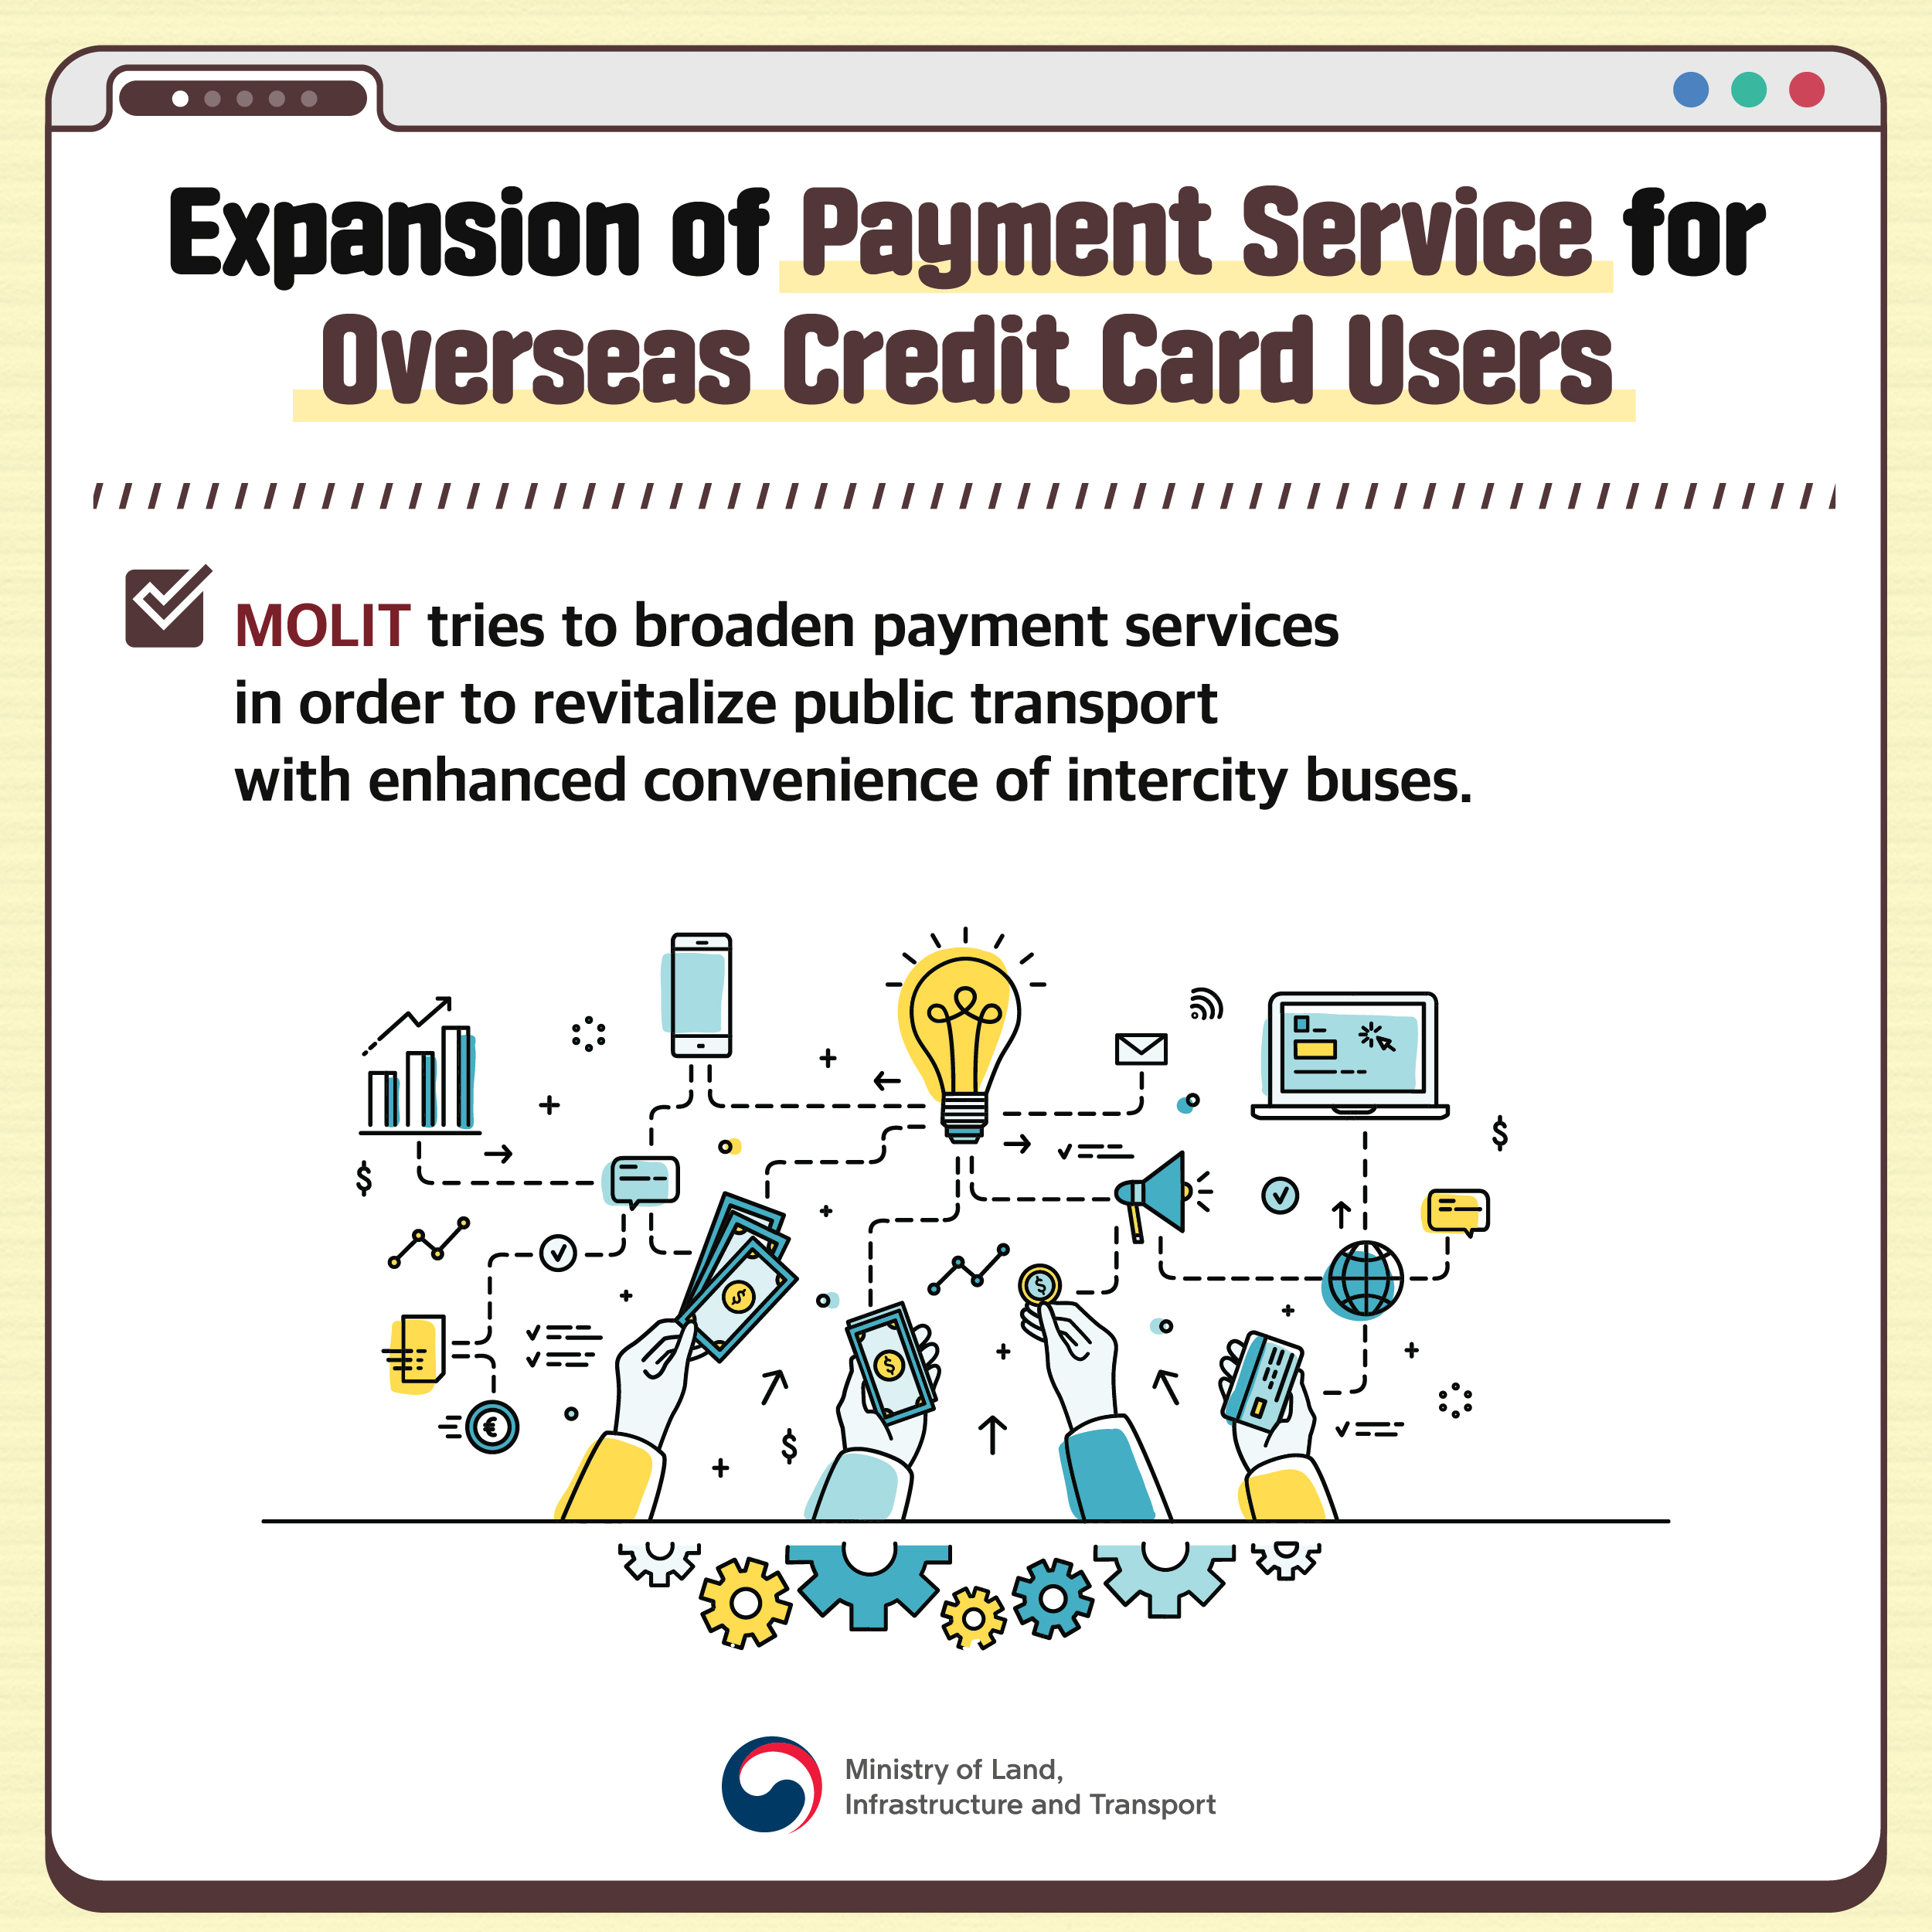 pic 2. Expansion of Payment Service for Overseas Credit Card Users

MOLIT tries to broaden payment services in order to revitalize public transport with enhanced convenience of intercity buses.